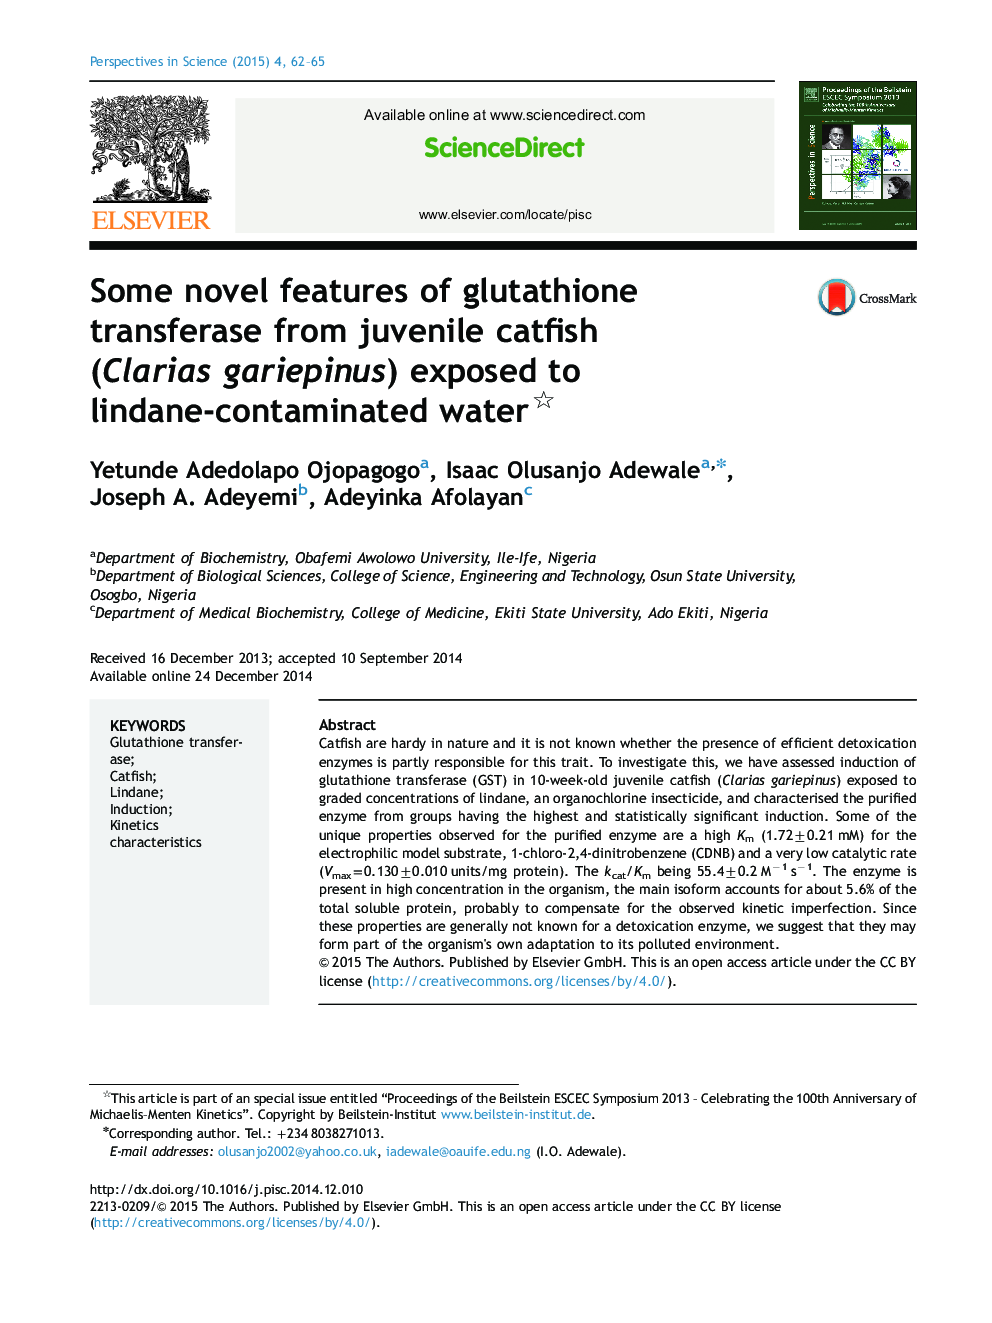 Some novel features of glutathione transferase from juvenile catfish (Clarias gariepinus) exposed to lindane-contaminated water 